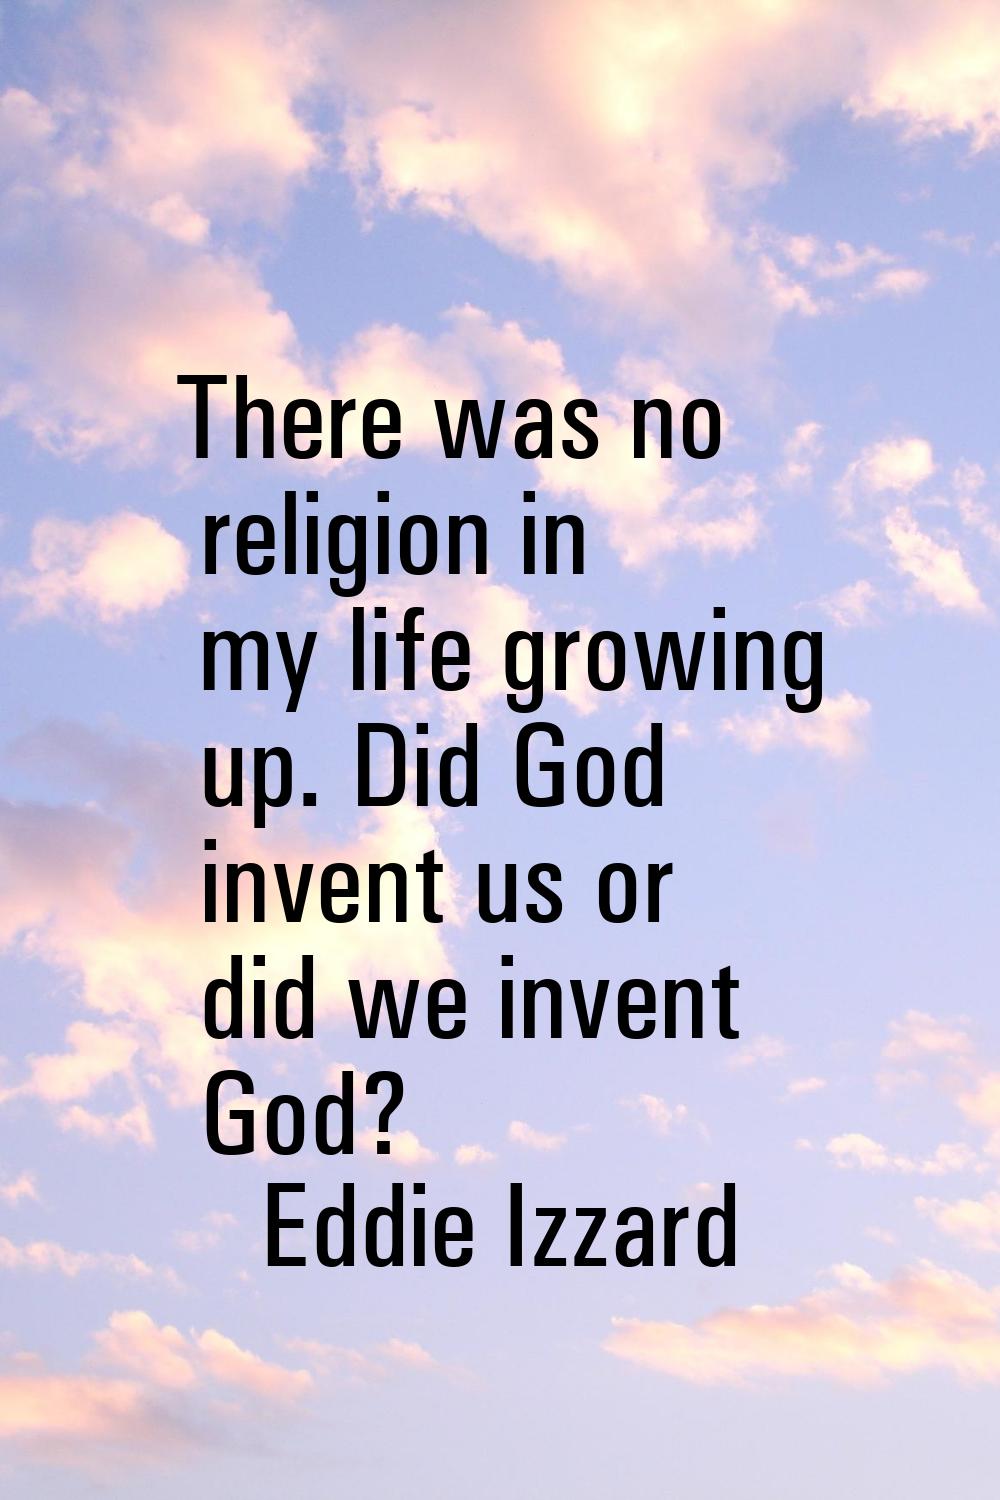 There was no religion in my life growing up. Did God invent us or did we invent God?